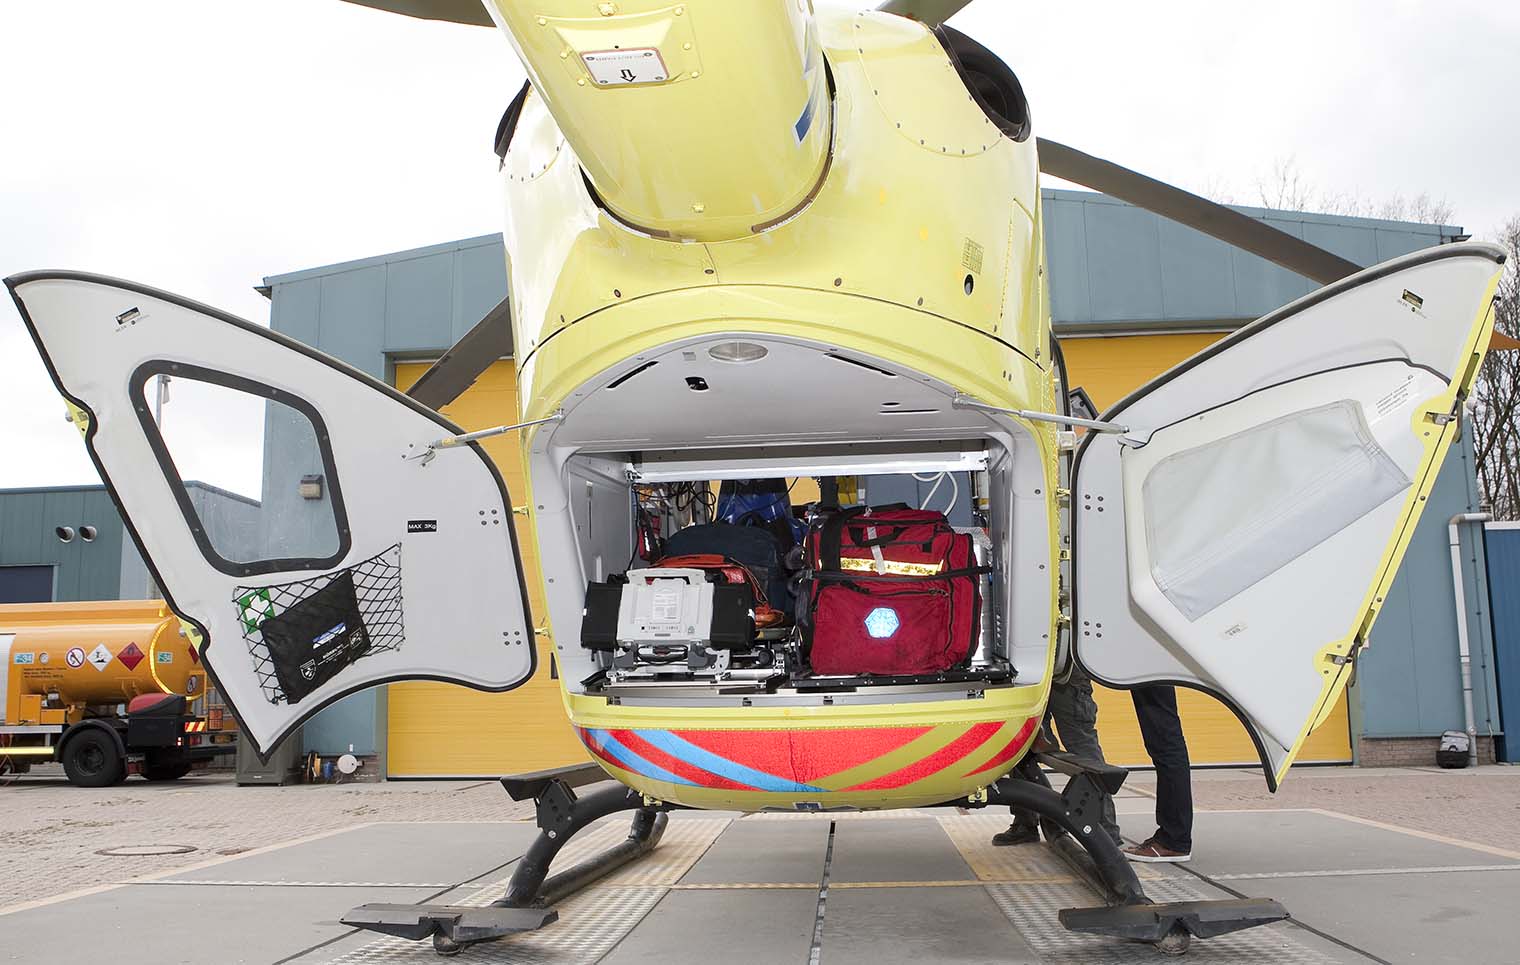 New ANWB trauma helicopter at Volkel